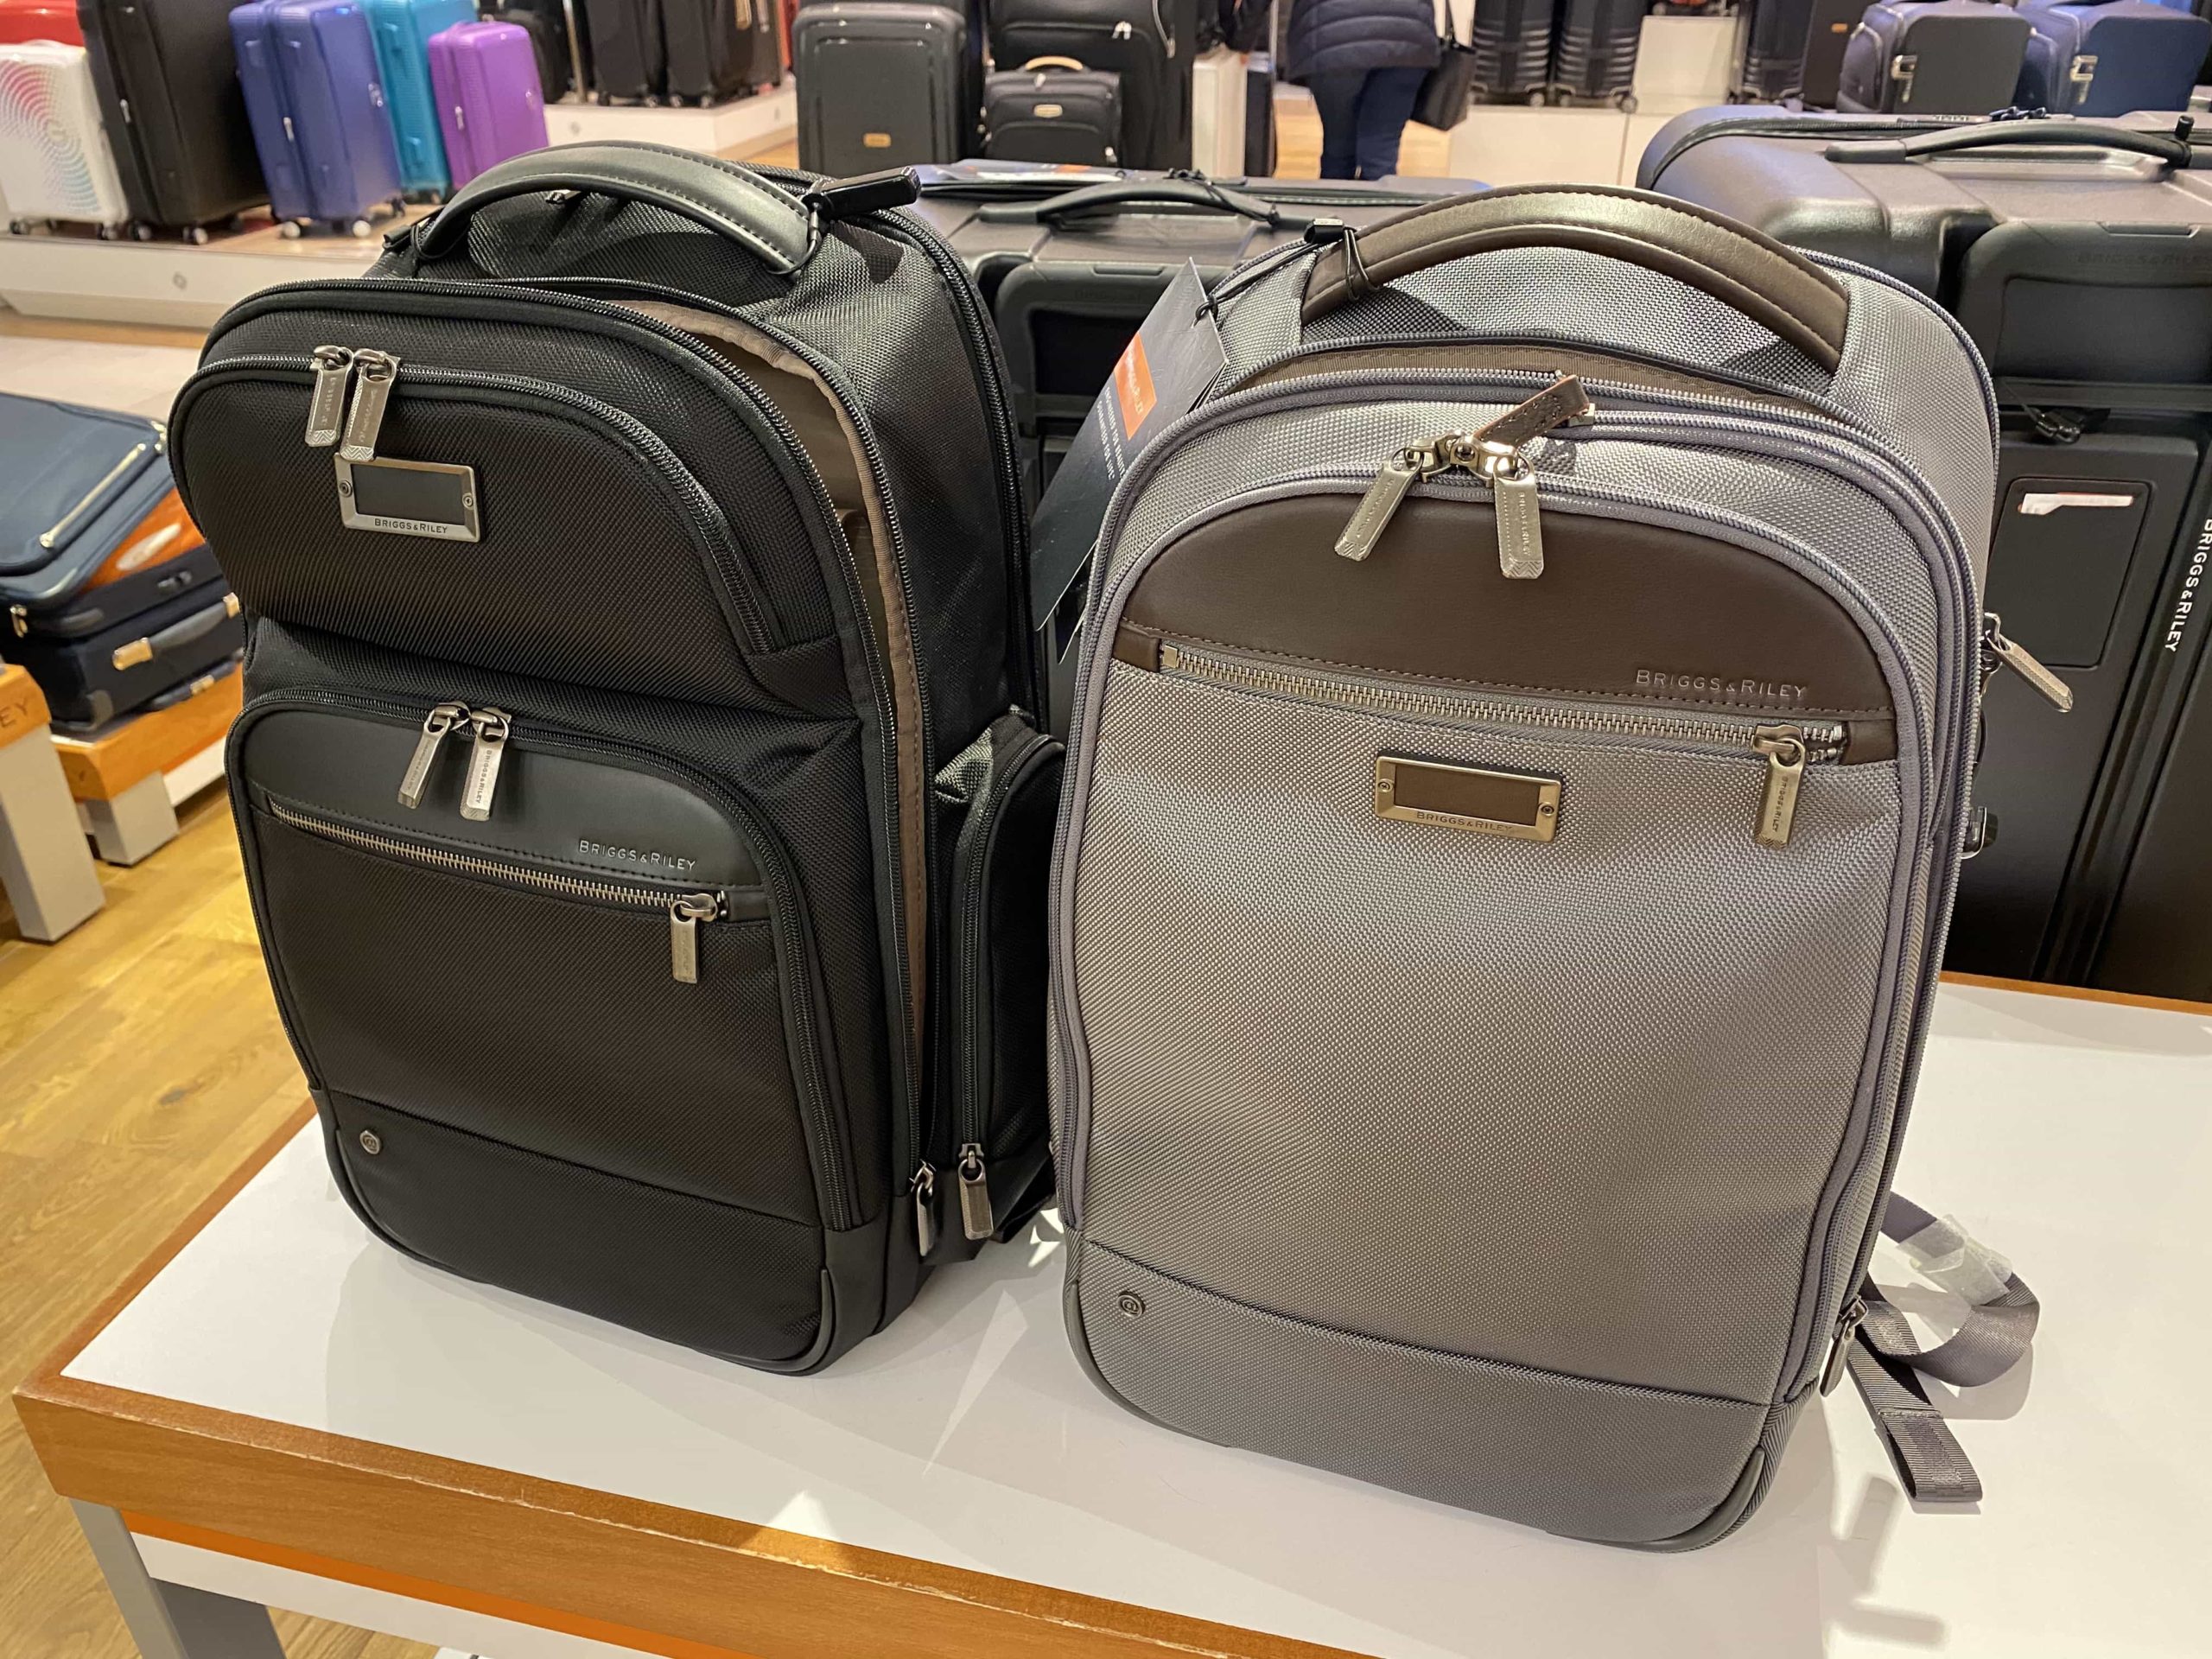 Two backpacks, side-by-side, as part of a display in a department store